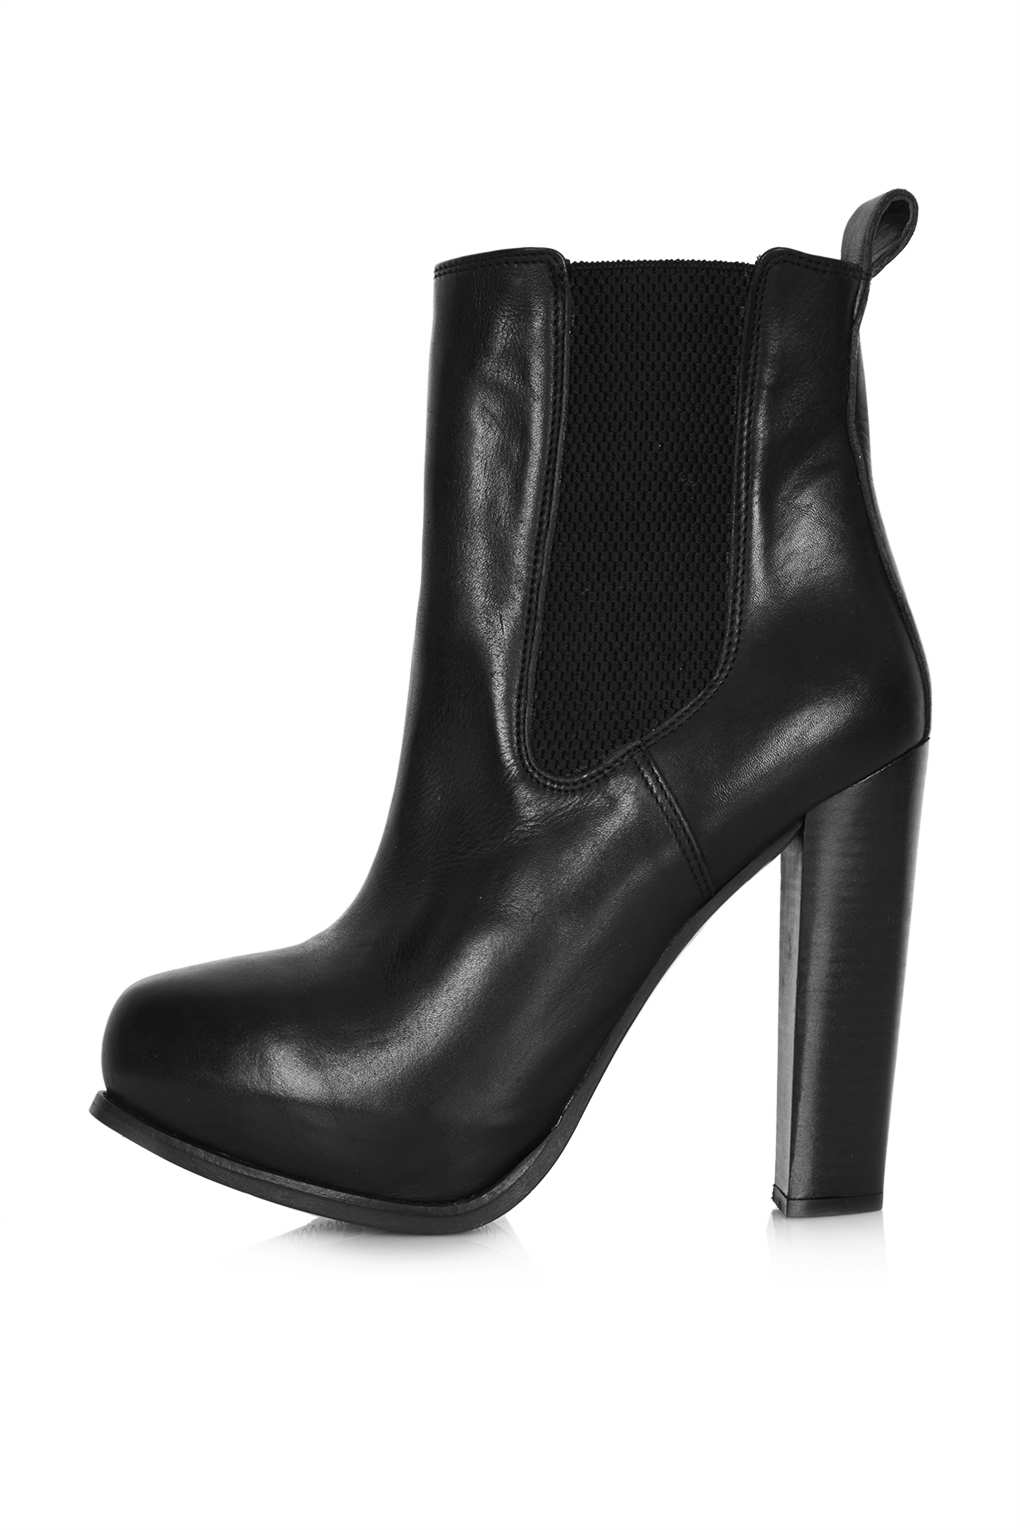 TOPSHOP Polly Premium Chelsea Boots in Black (Blue) - Lyst